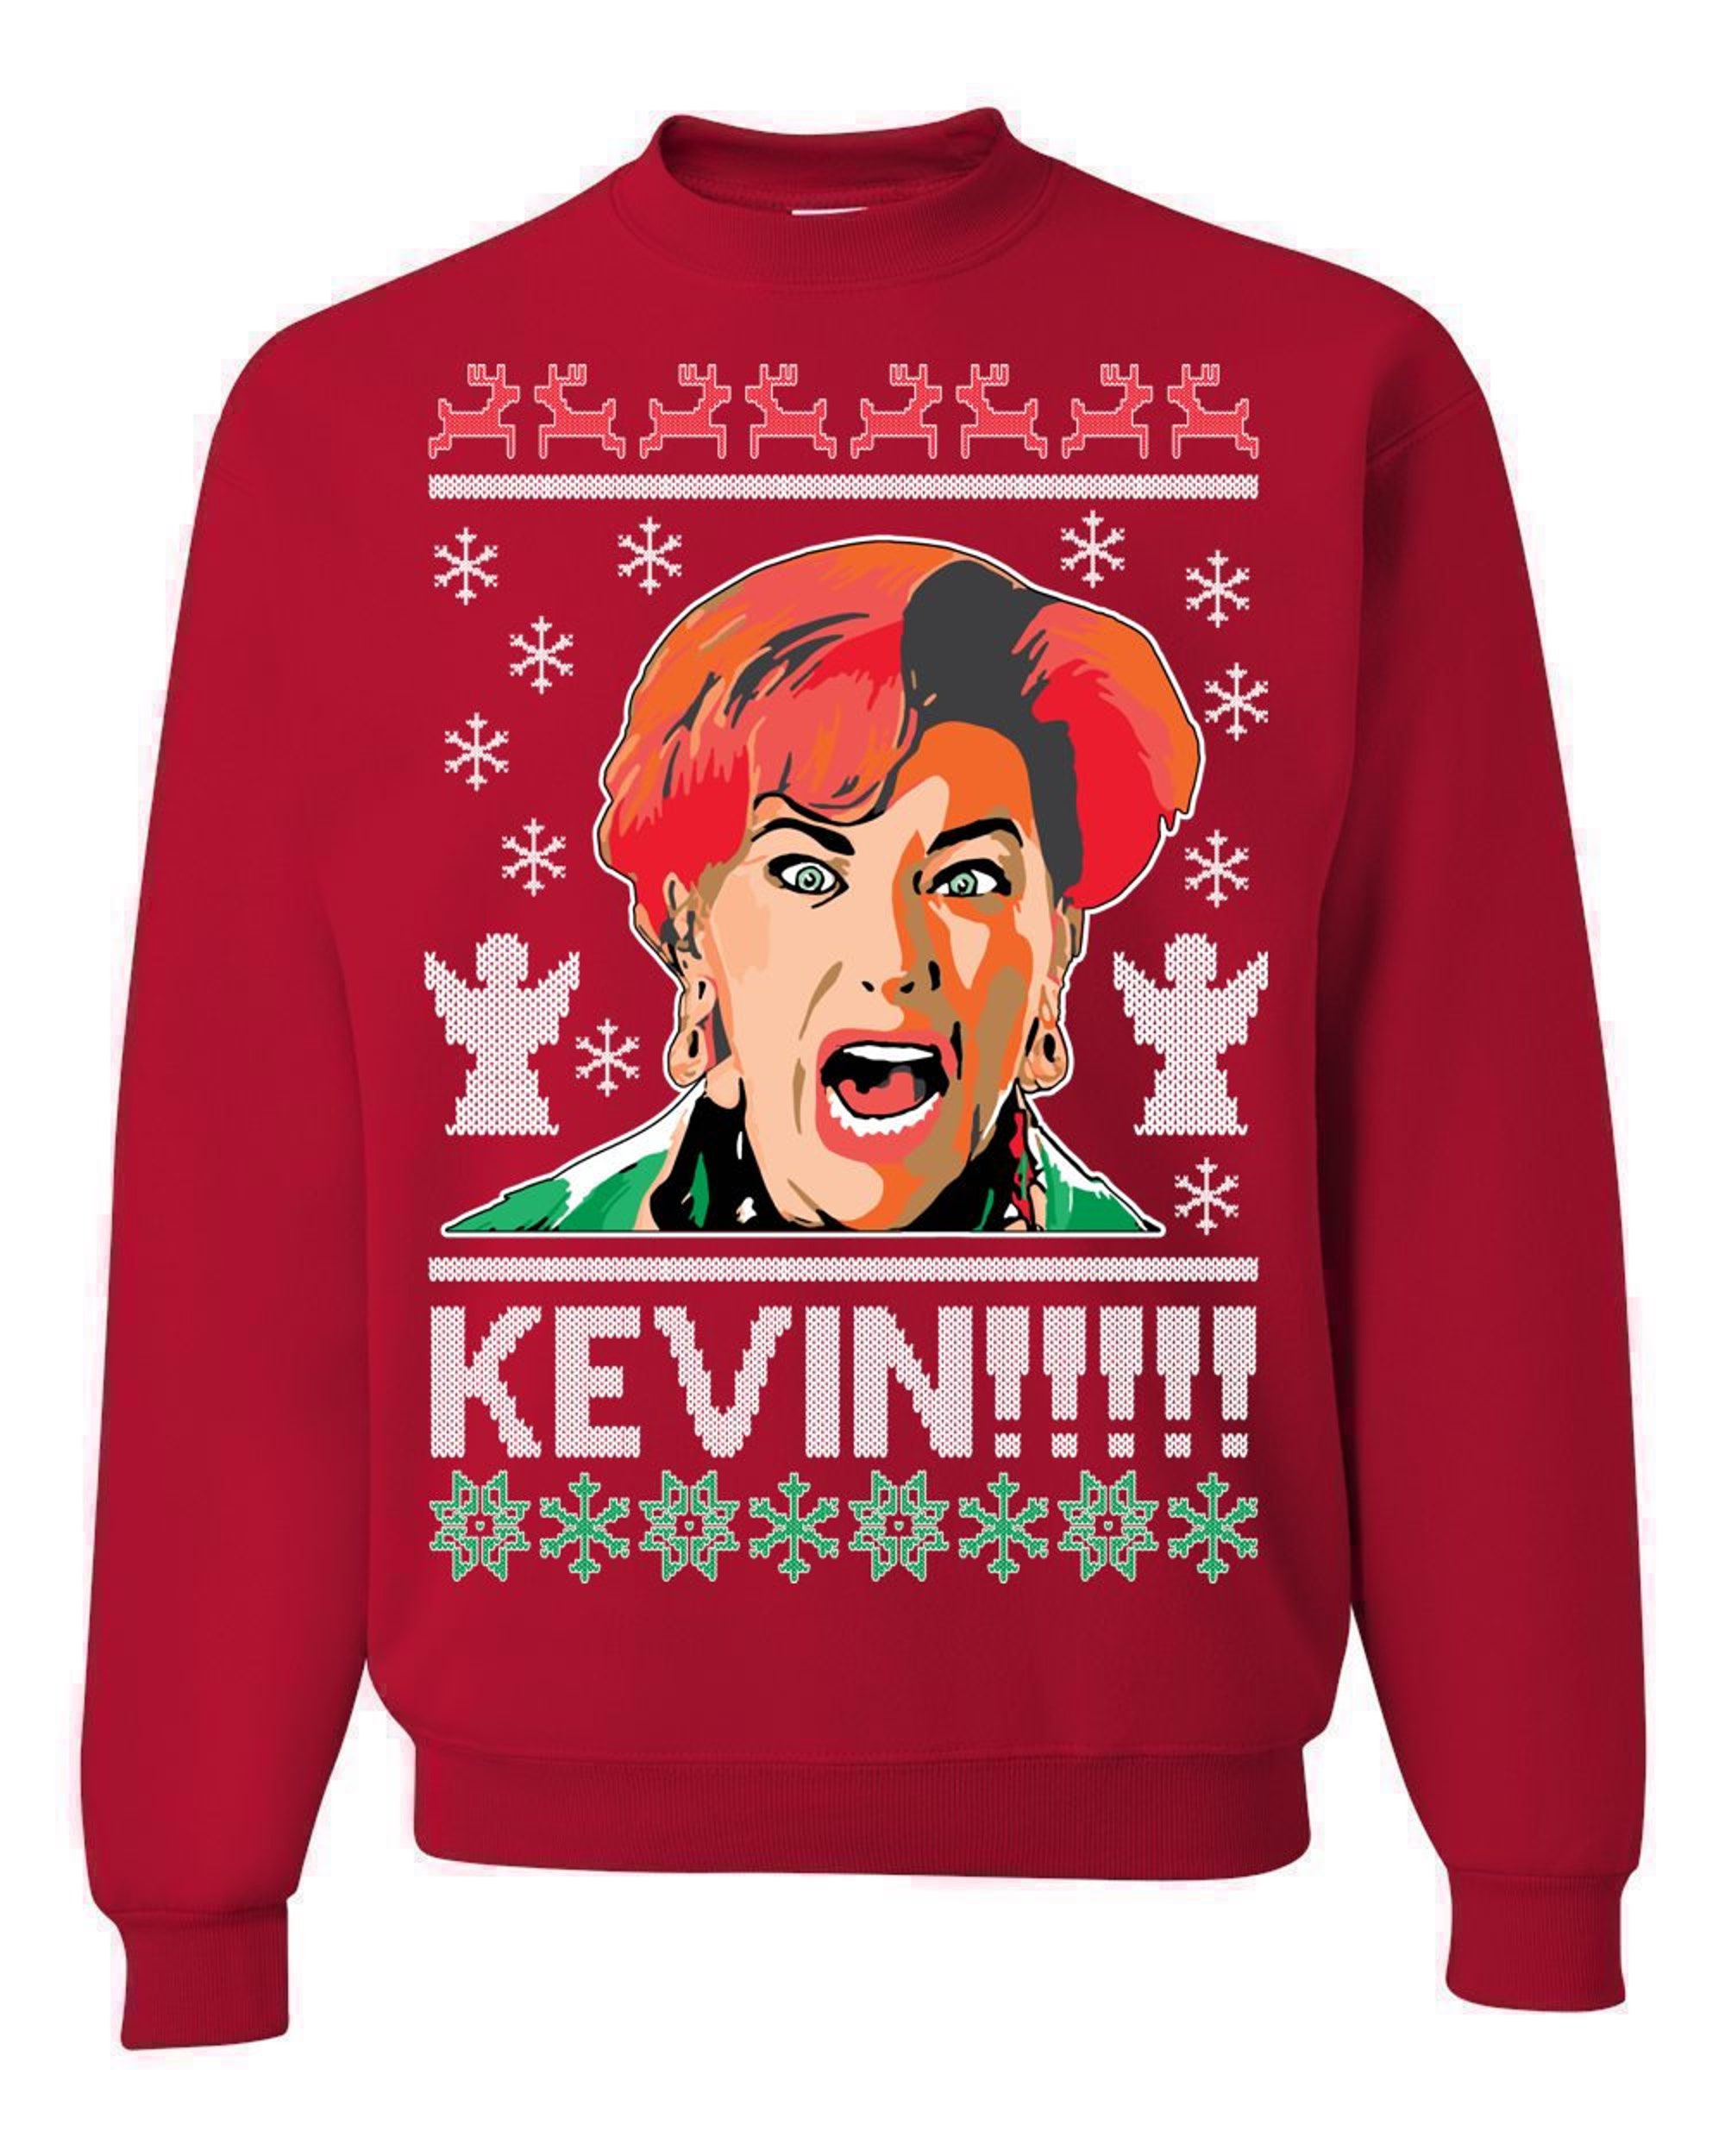 Discover Ugly Christmas Sweater Home Alone Kevin! Unisex Sweatshirt